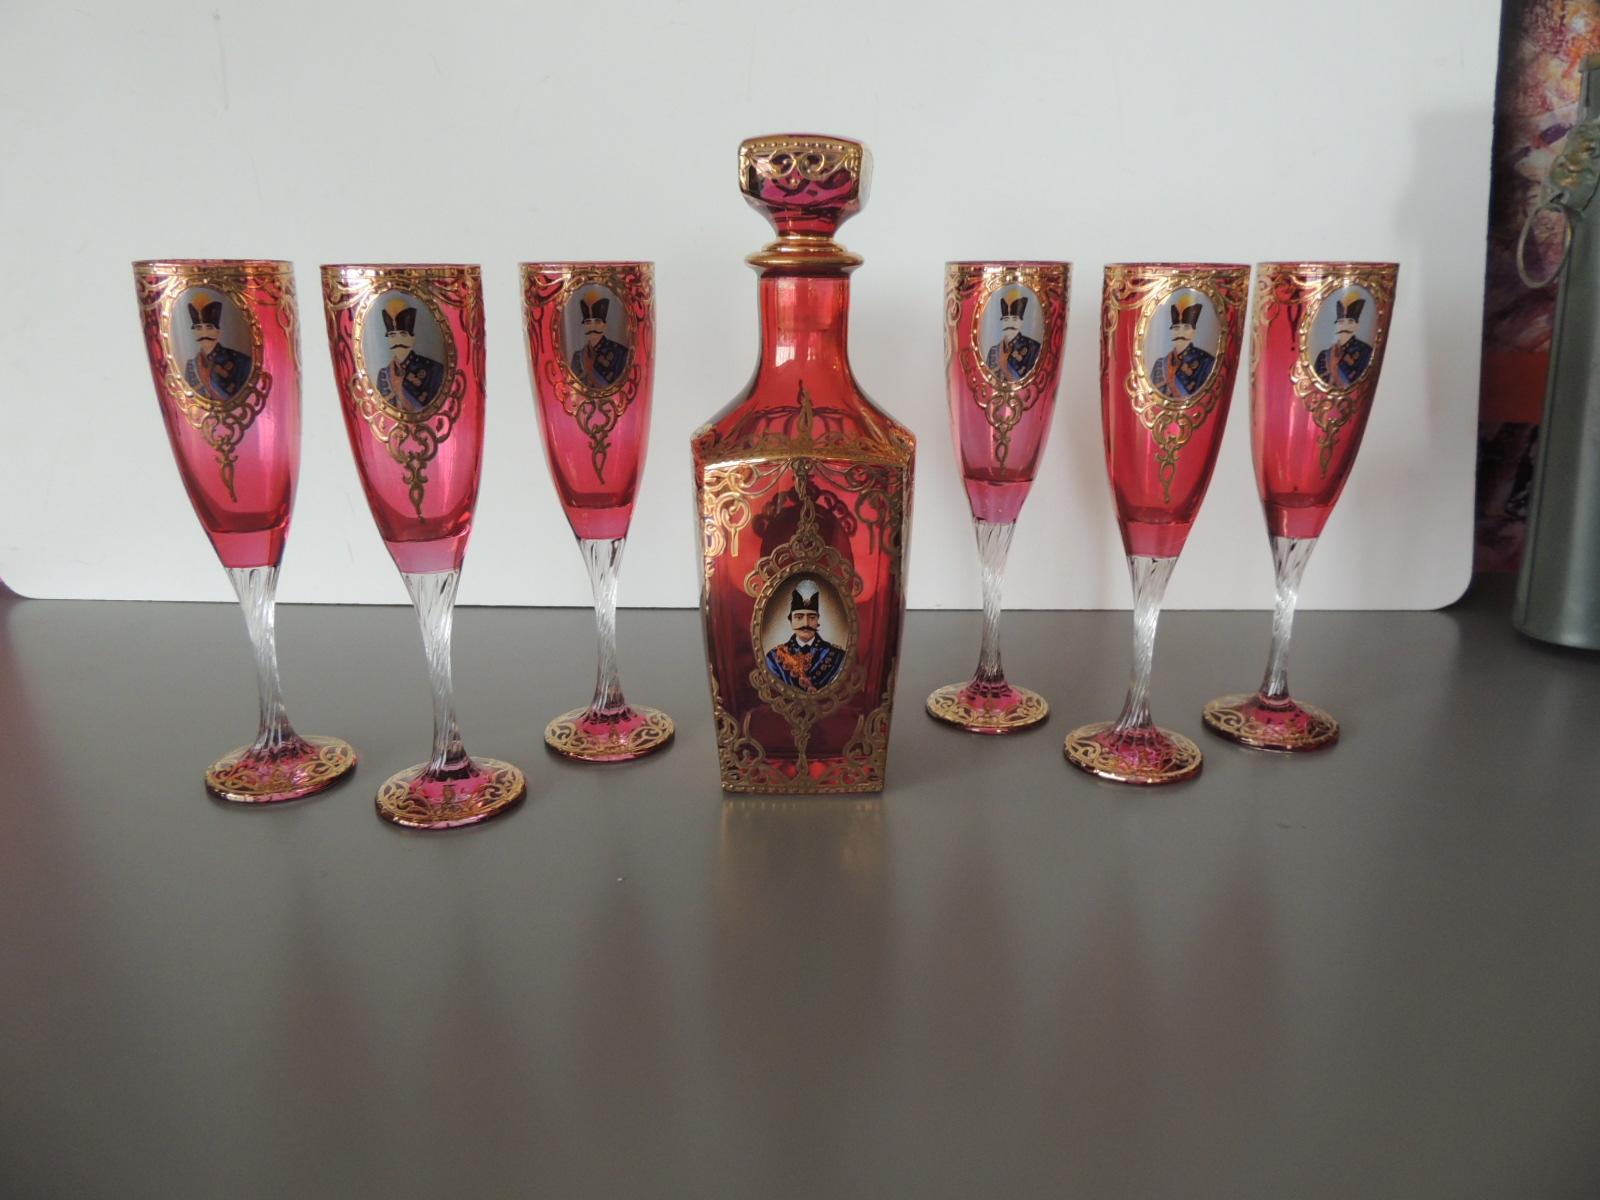 Antique style Bohemian Flue Glasses With Shah of Persia and Decanter set
Hand blown glasses made for the Persian market.
6 flutes and a Decanter in this set
Size of glasses: 2 x 2 x 8.5' H
Size of decanter 3 x 2.5 x 10